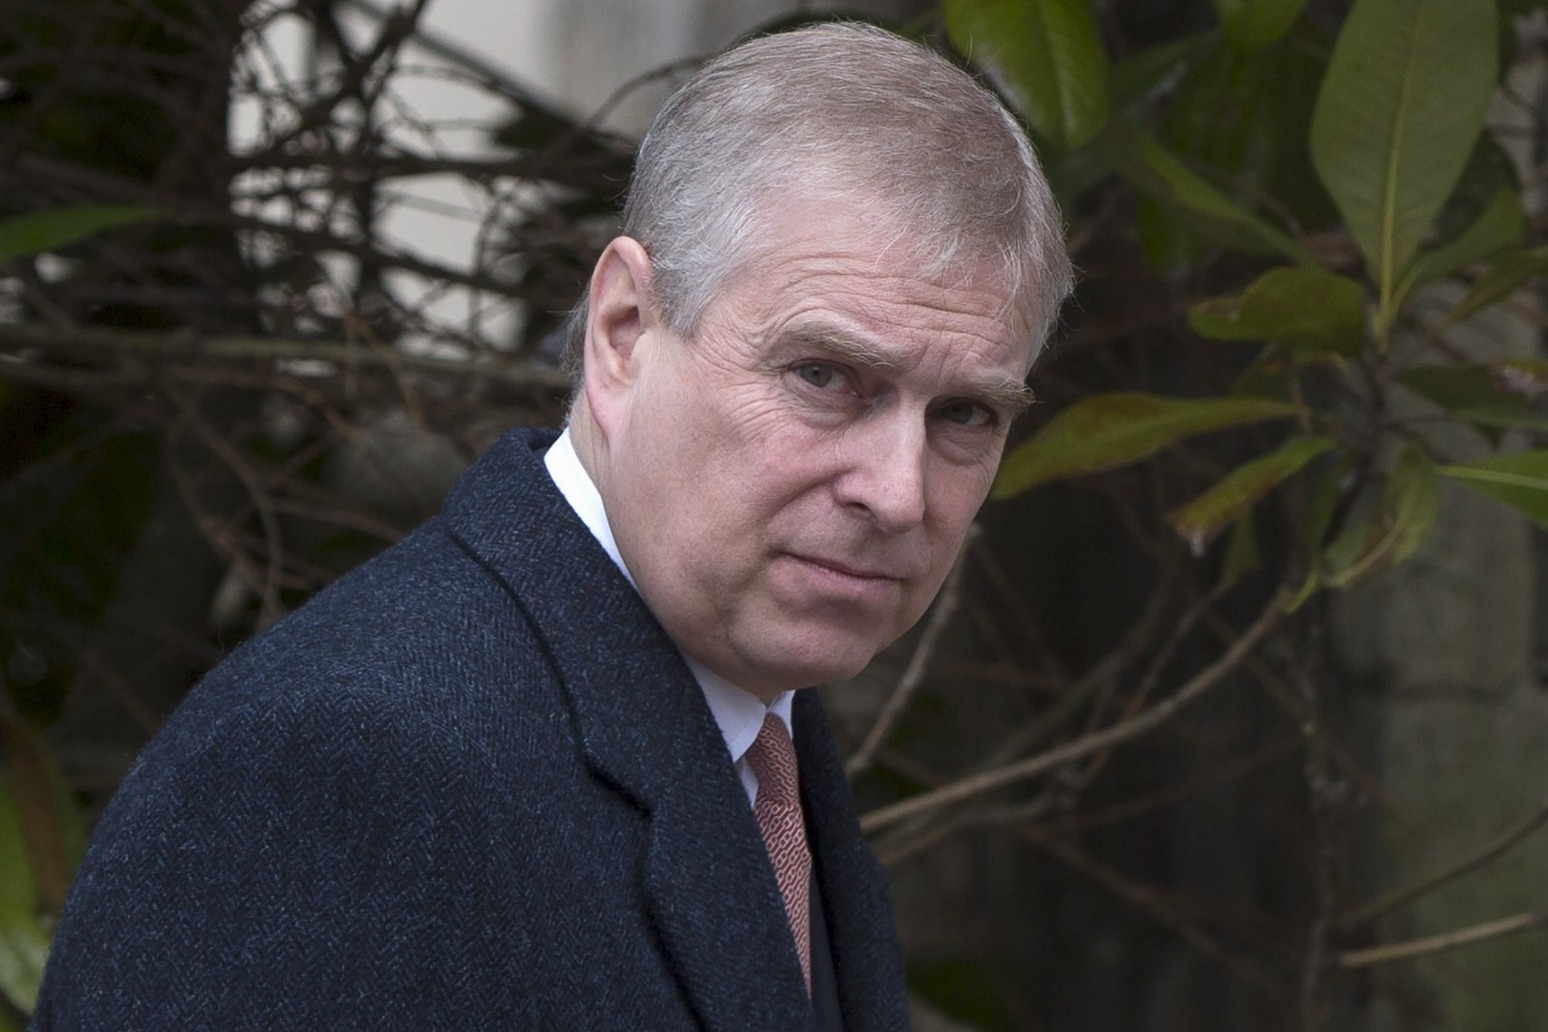 Duke of York named in court documents relating to paedophile Jeffrey Epstein 